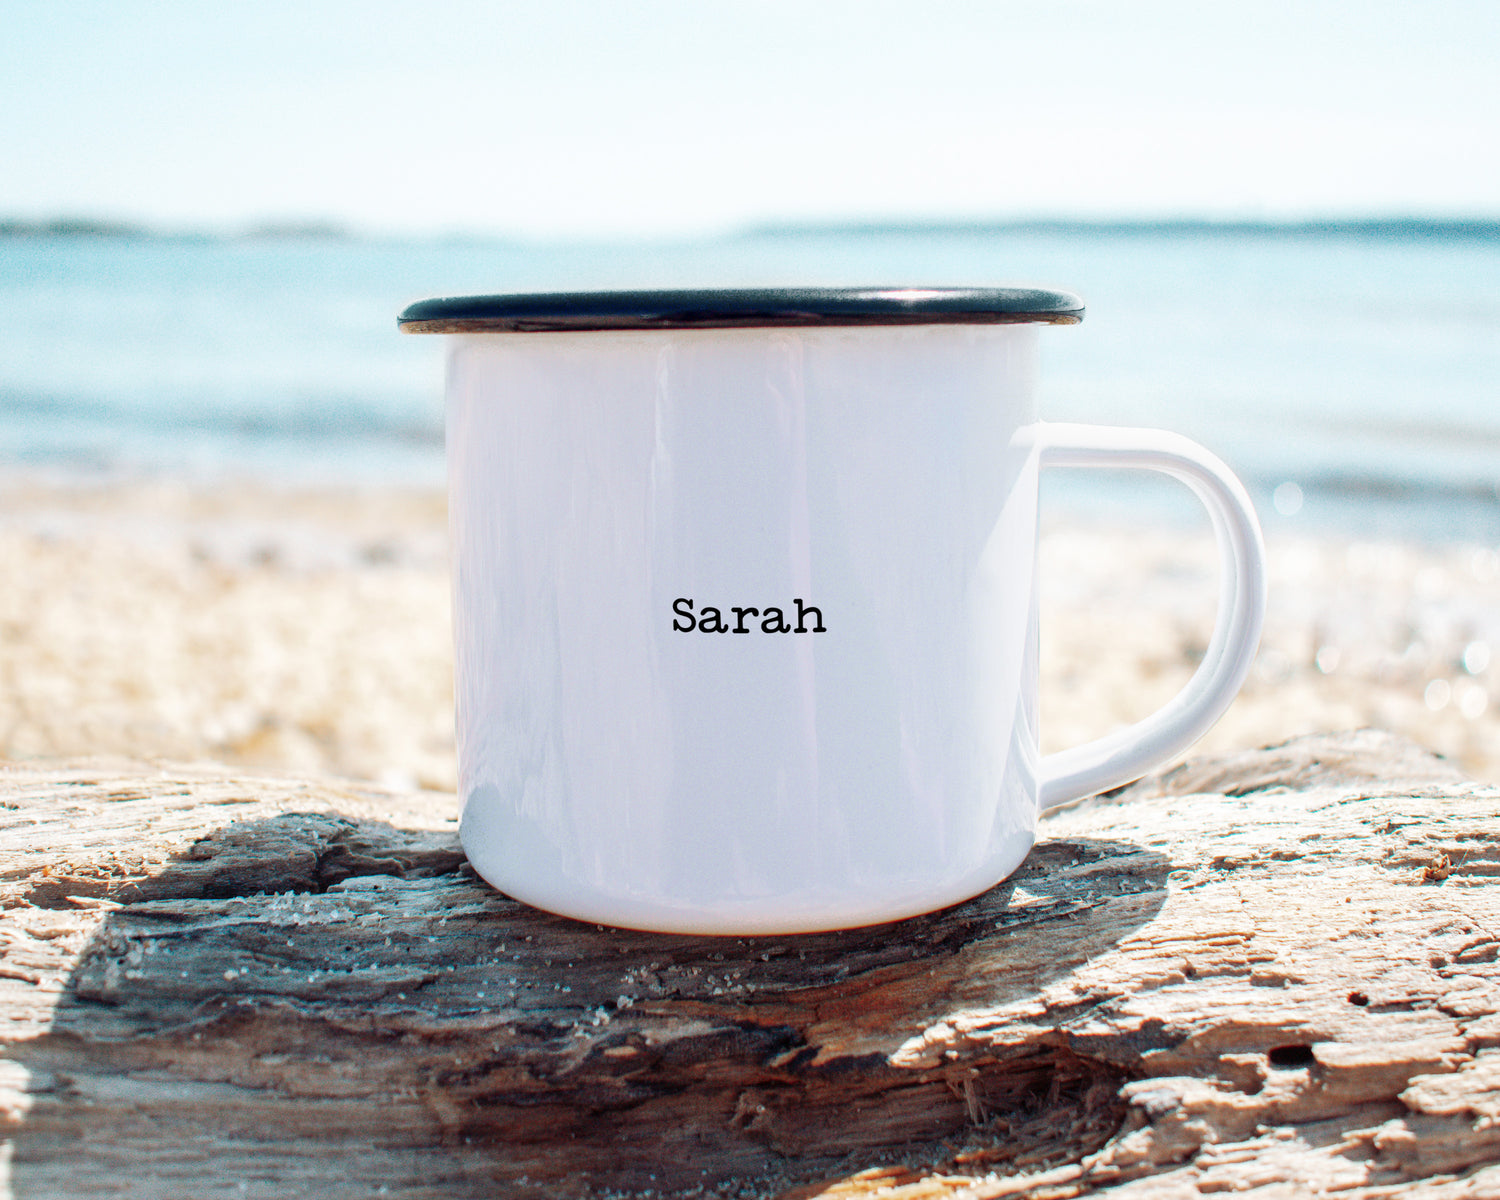 Mightier Than the Waves of the Sea Camp Mug